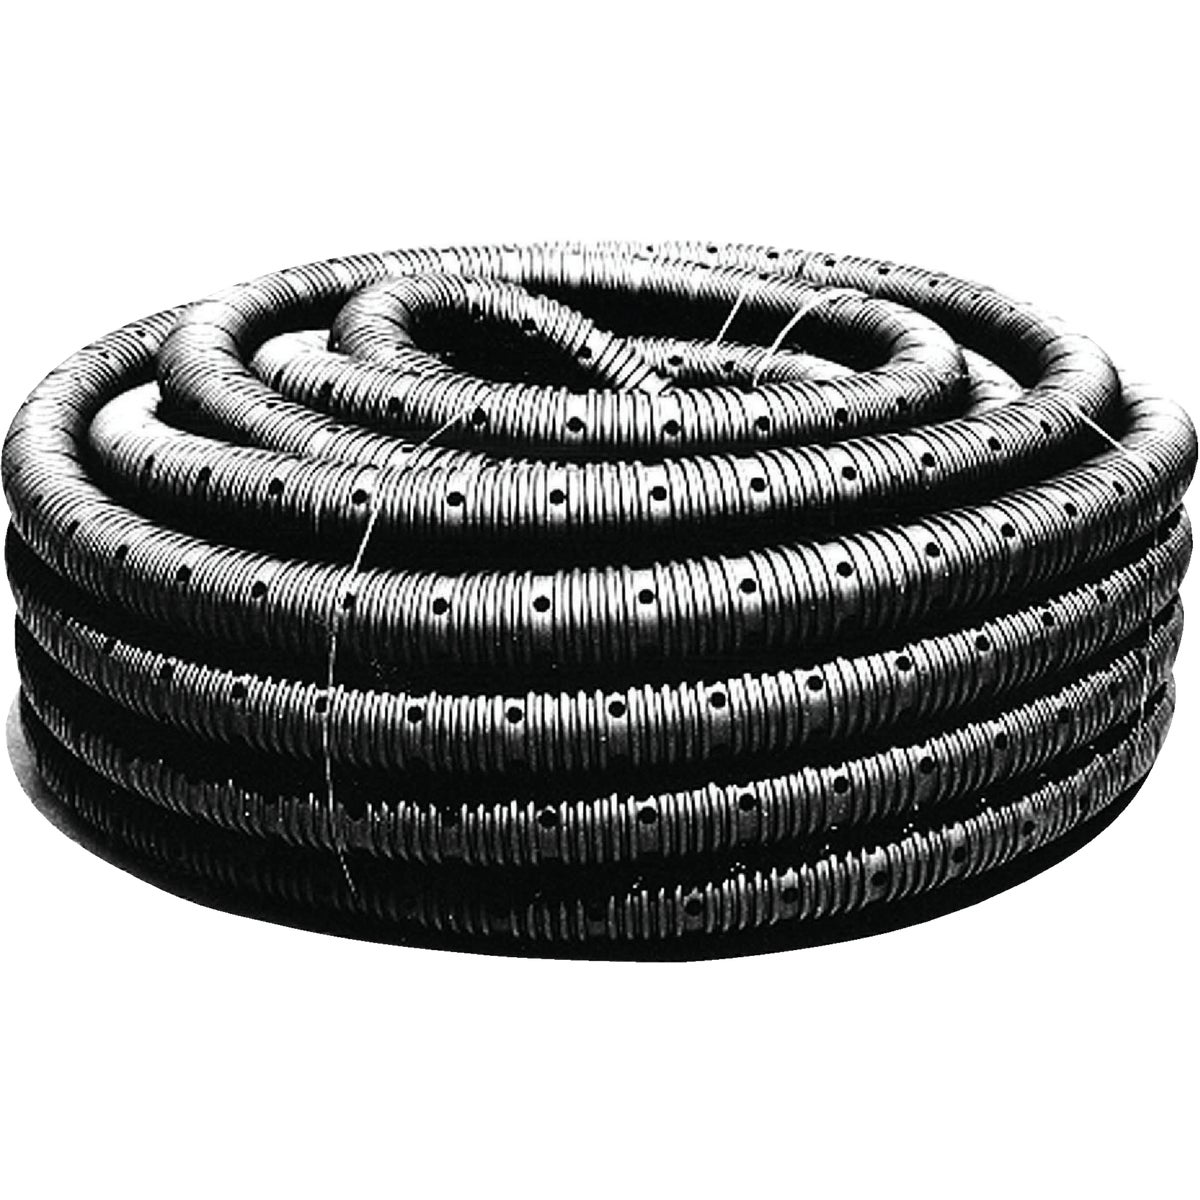 Advanced Drainage Systems 4 In. X 100 Ft. Corrugated Septic Pipe